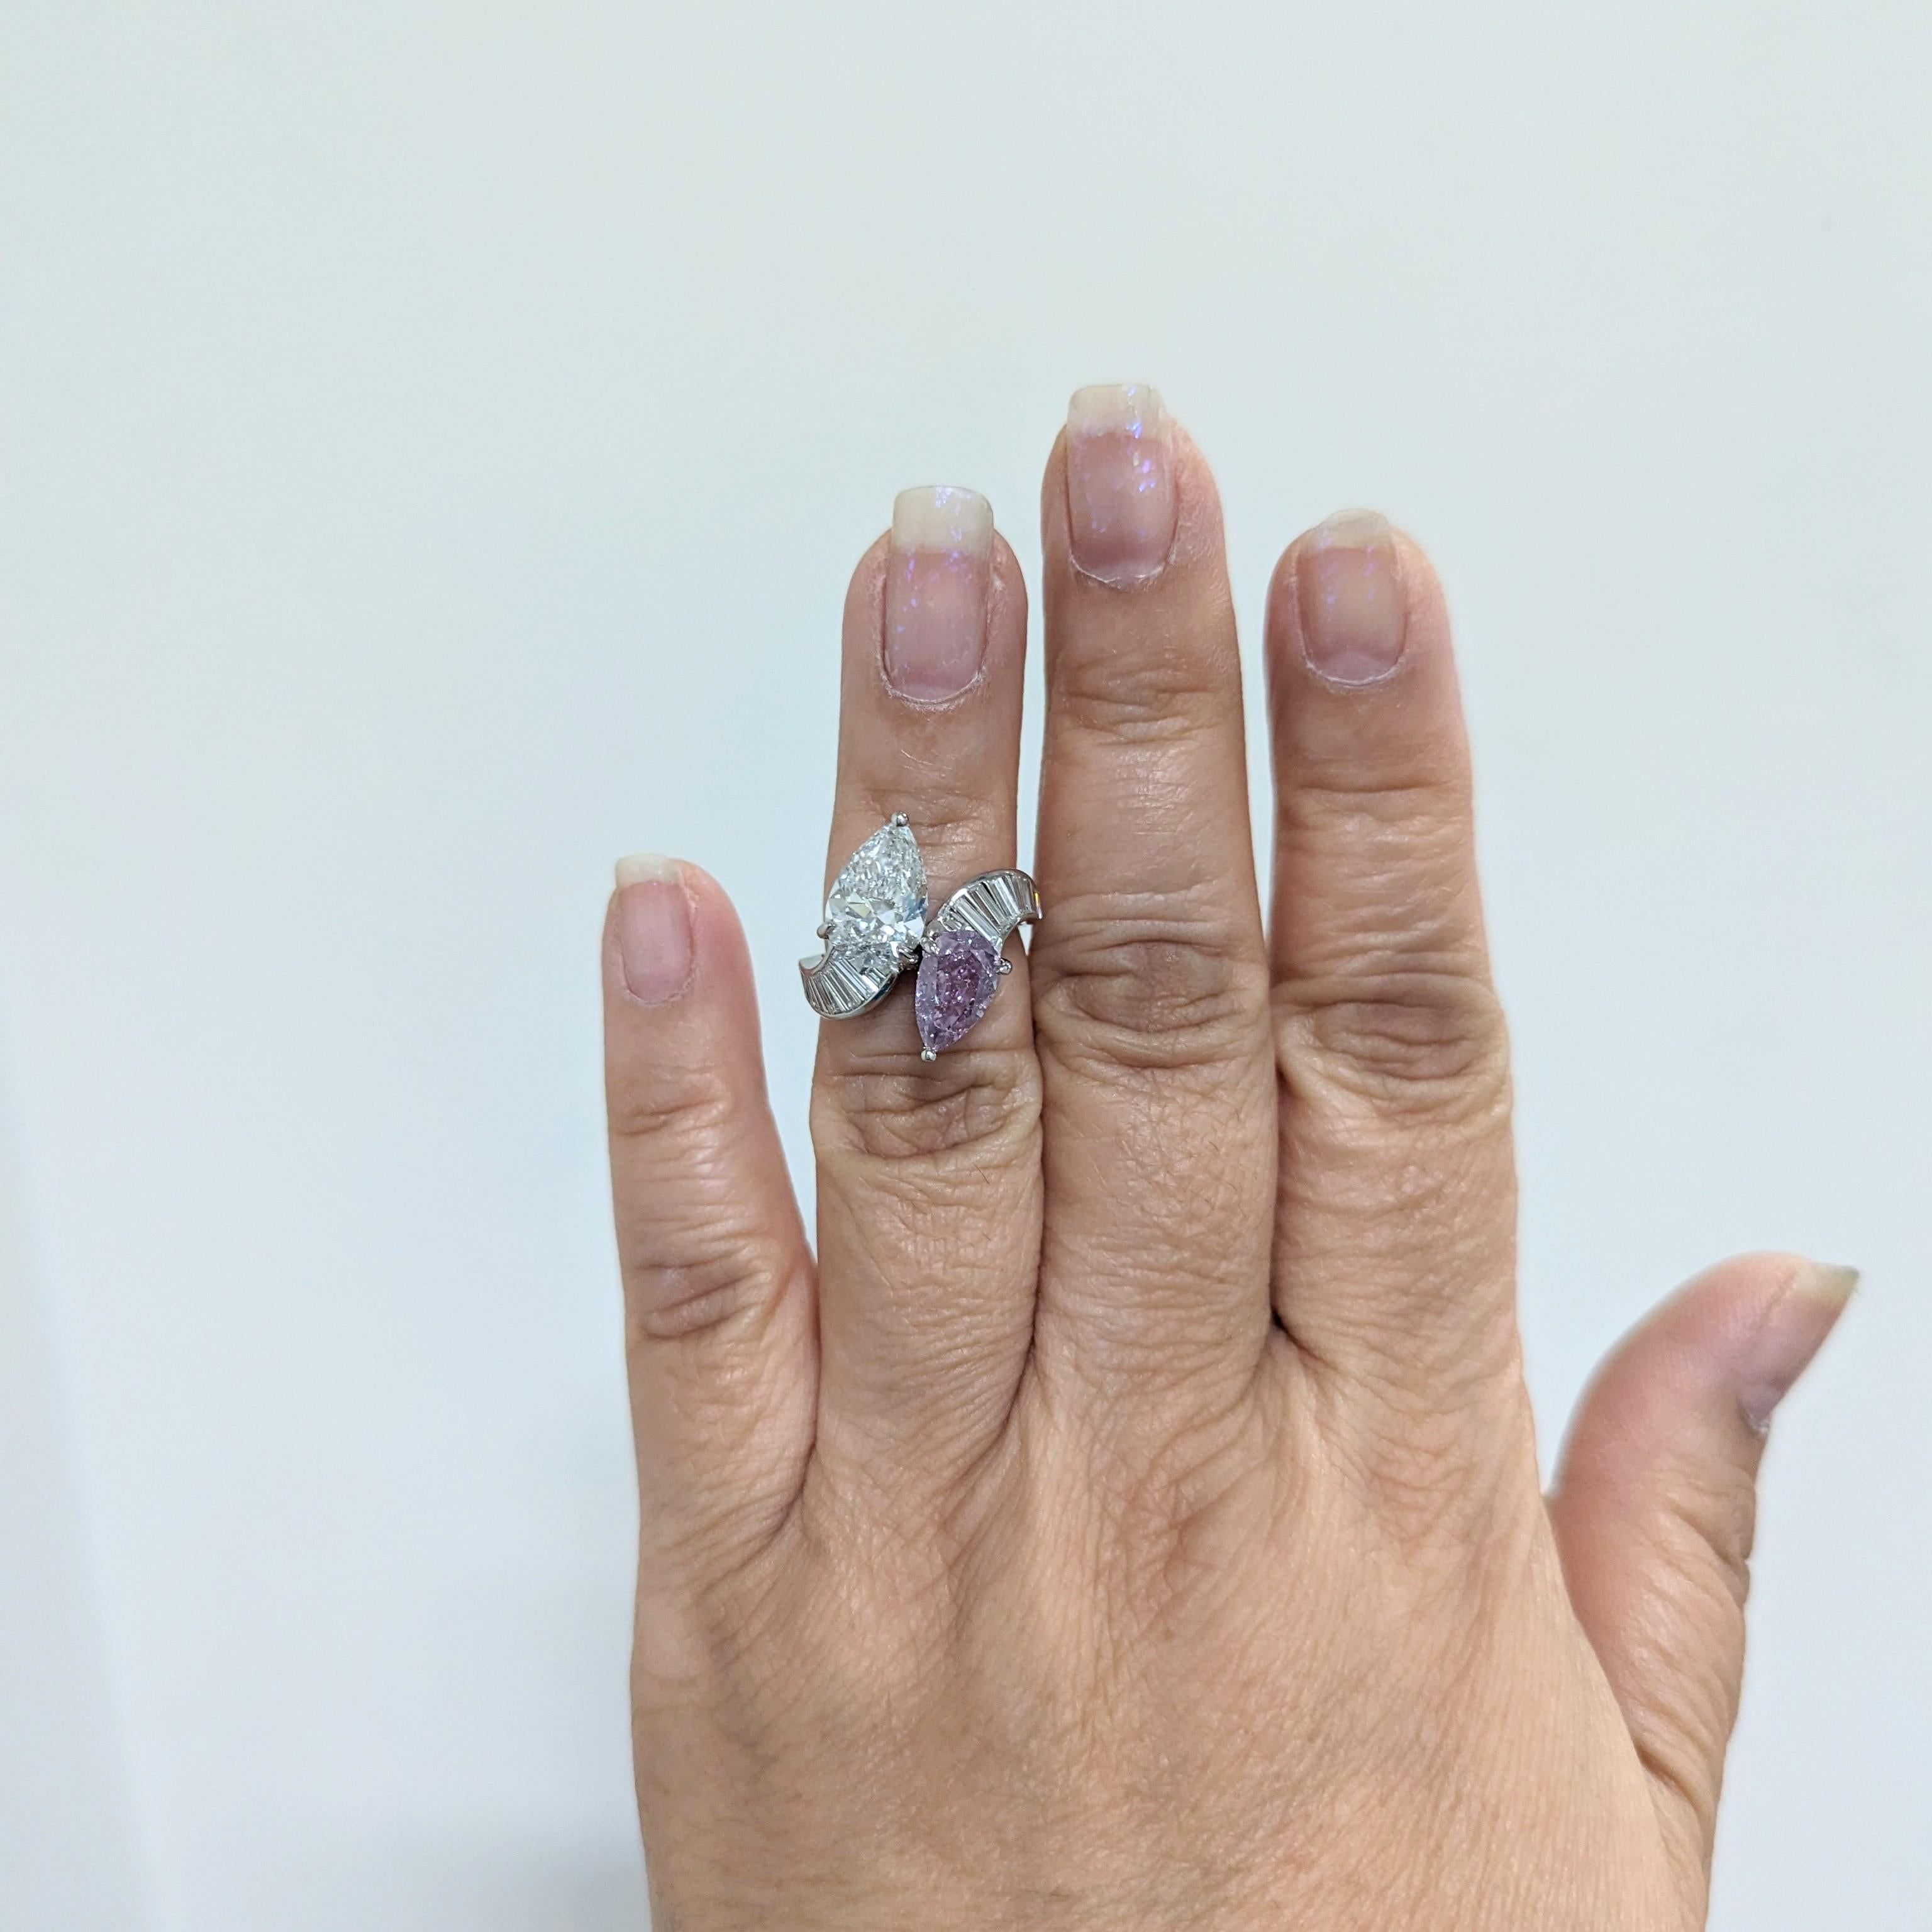 Absolutely stunning 2.01 ct. fancy intense pinkish purple pear shape diamond with a 3.01 ct. F SI2 white pear shape diamond.  This bypass ring is rare and one of a kind.  A sophisticated and elevated addition to any jewelry collection.  Ring size